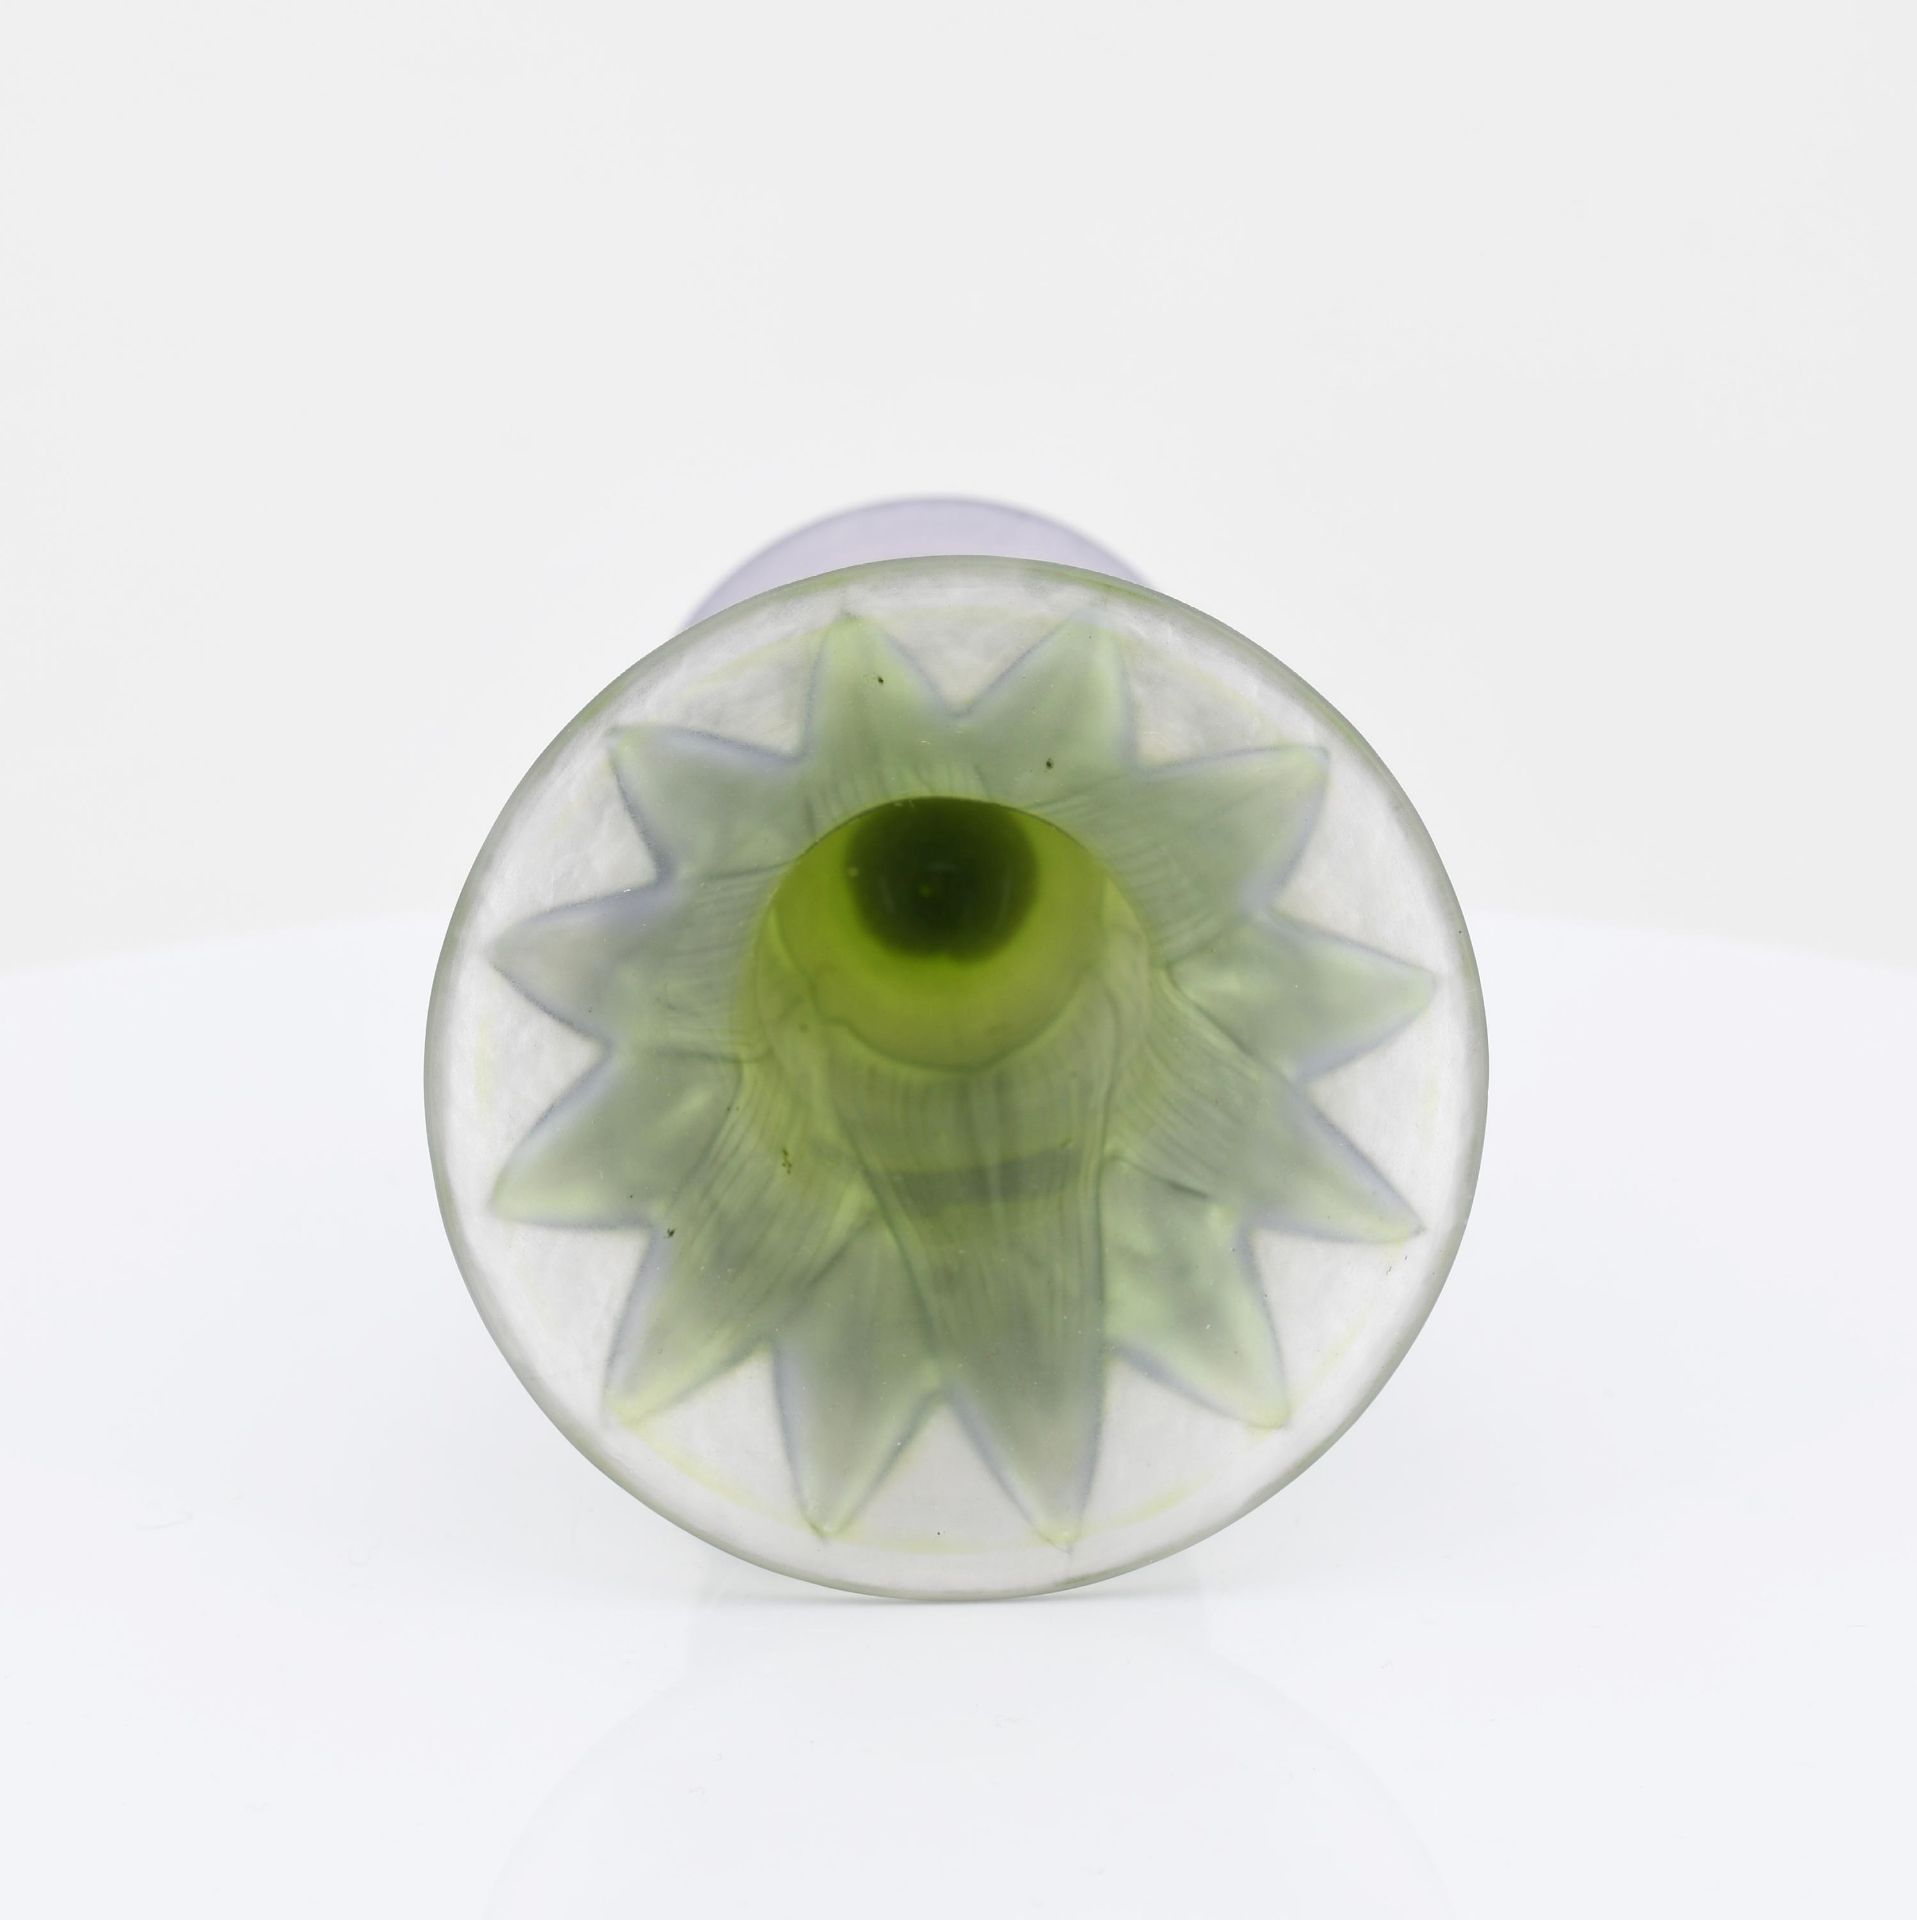 Stem glass with lotus petals - Image 5 of 6